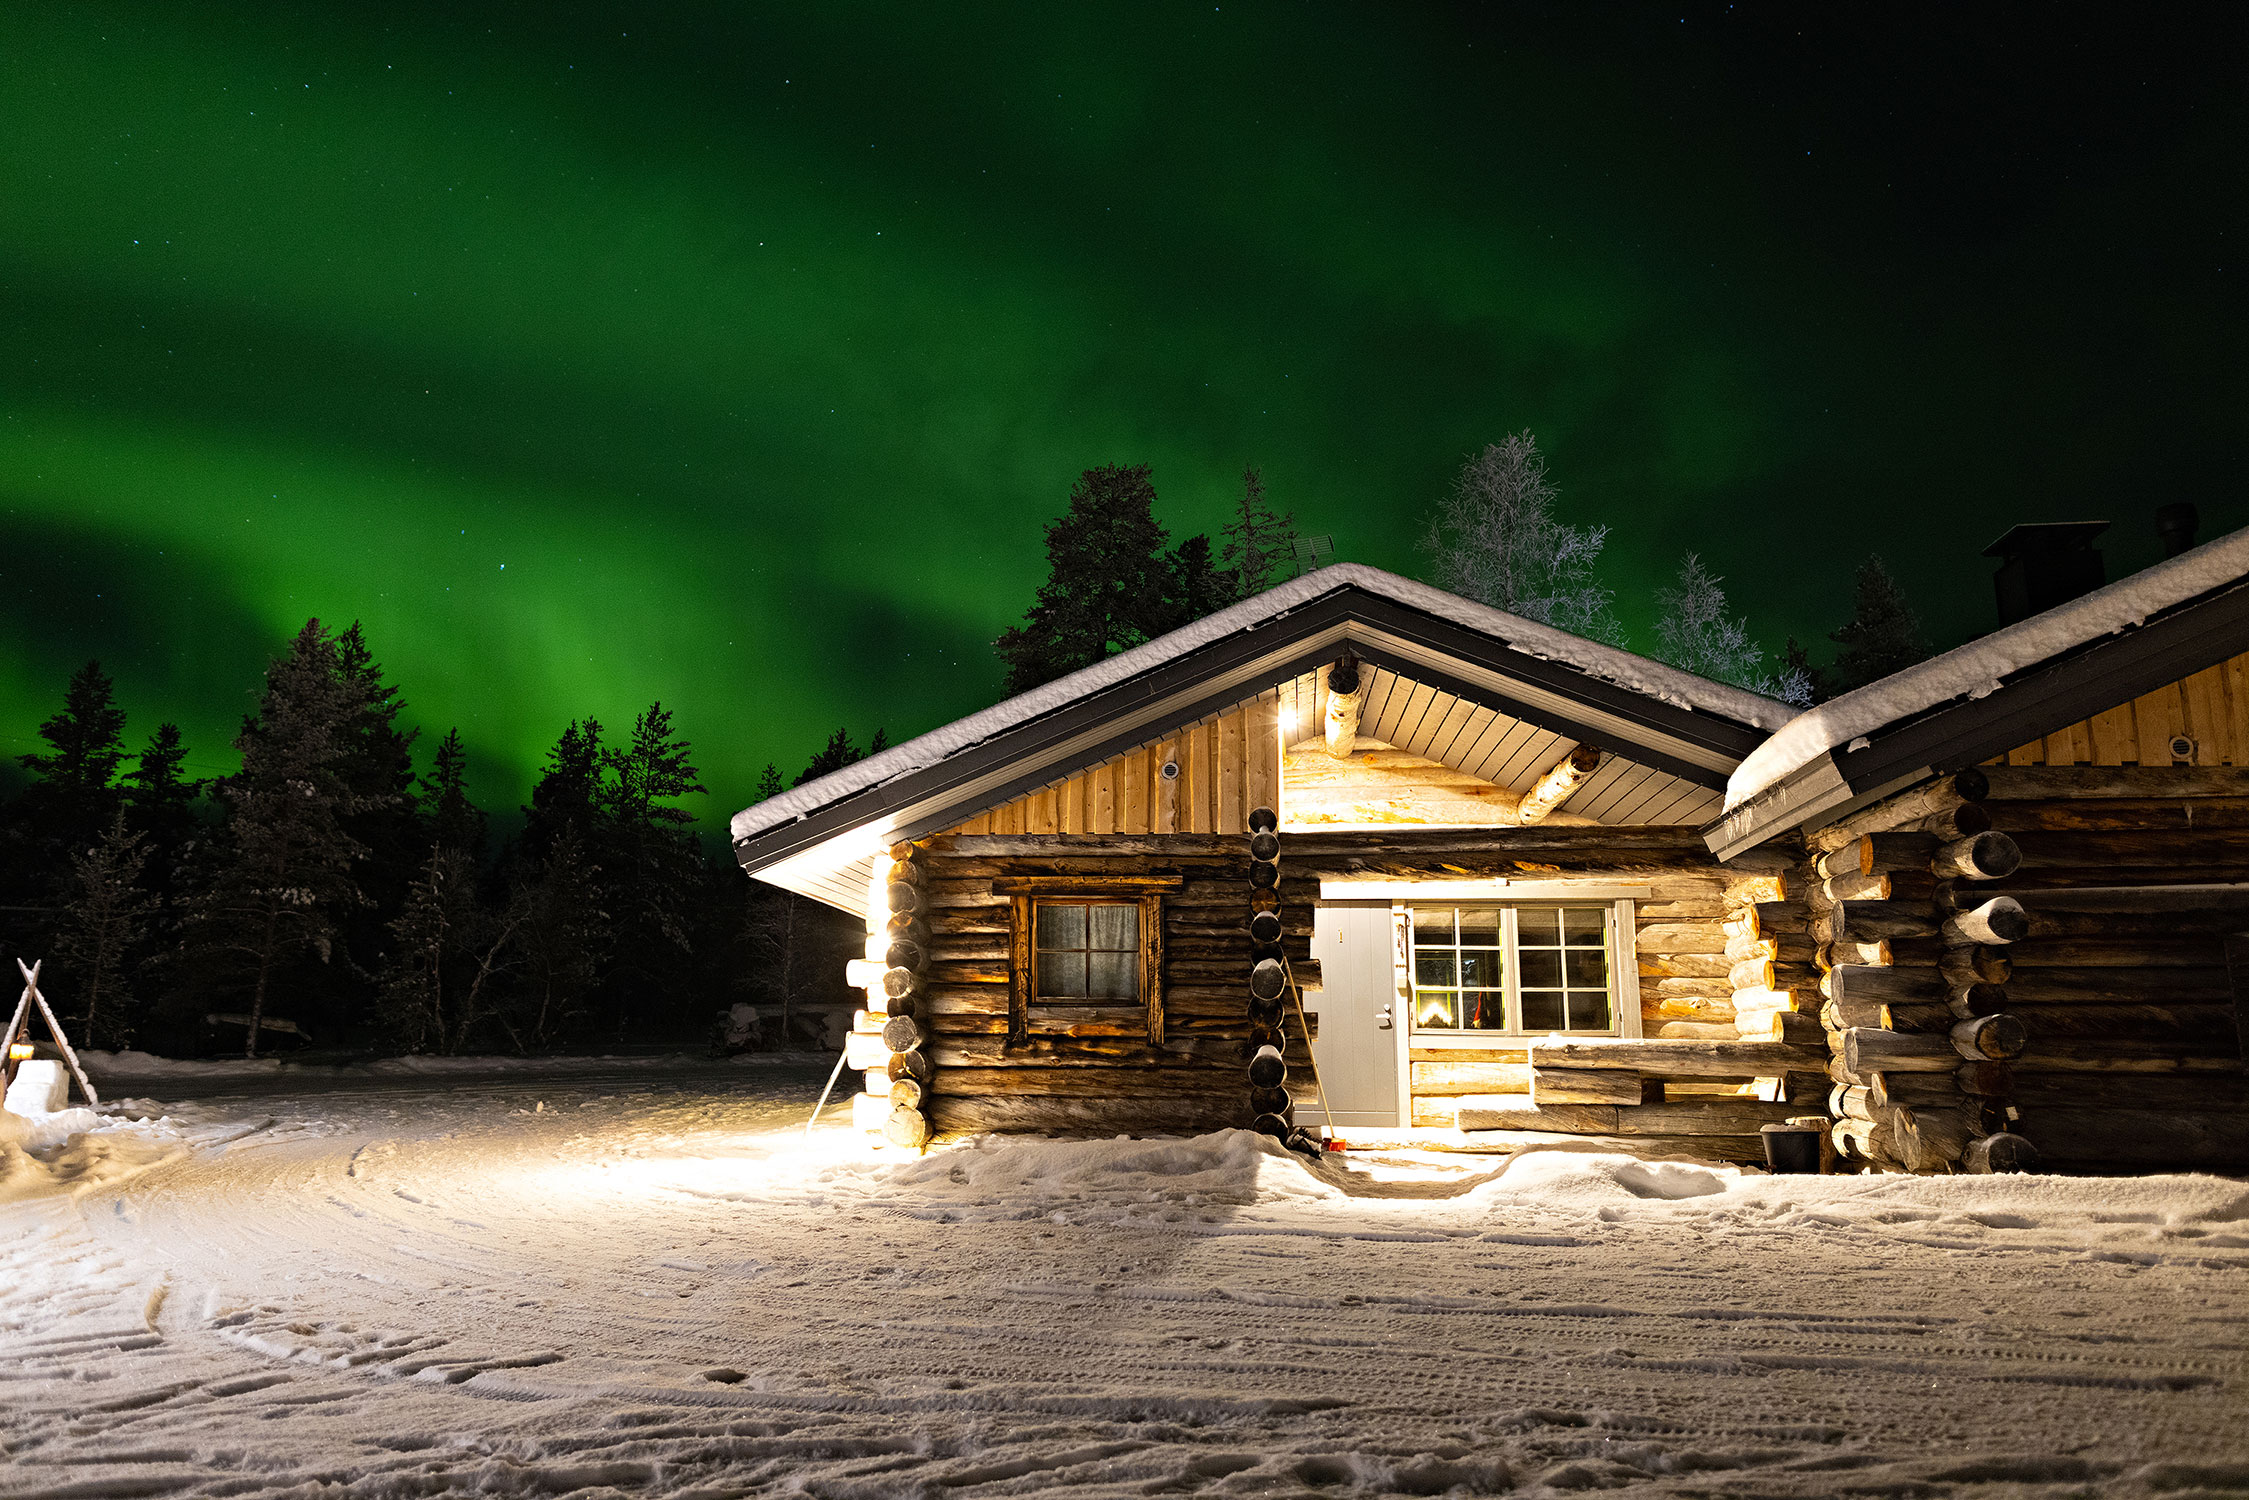 Northern lights consist of colourful, dancing and varying patterns in the night sky.